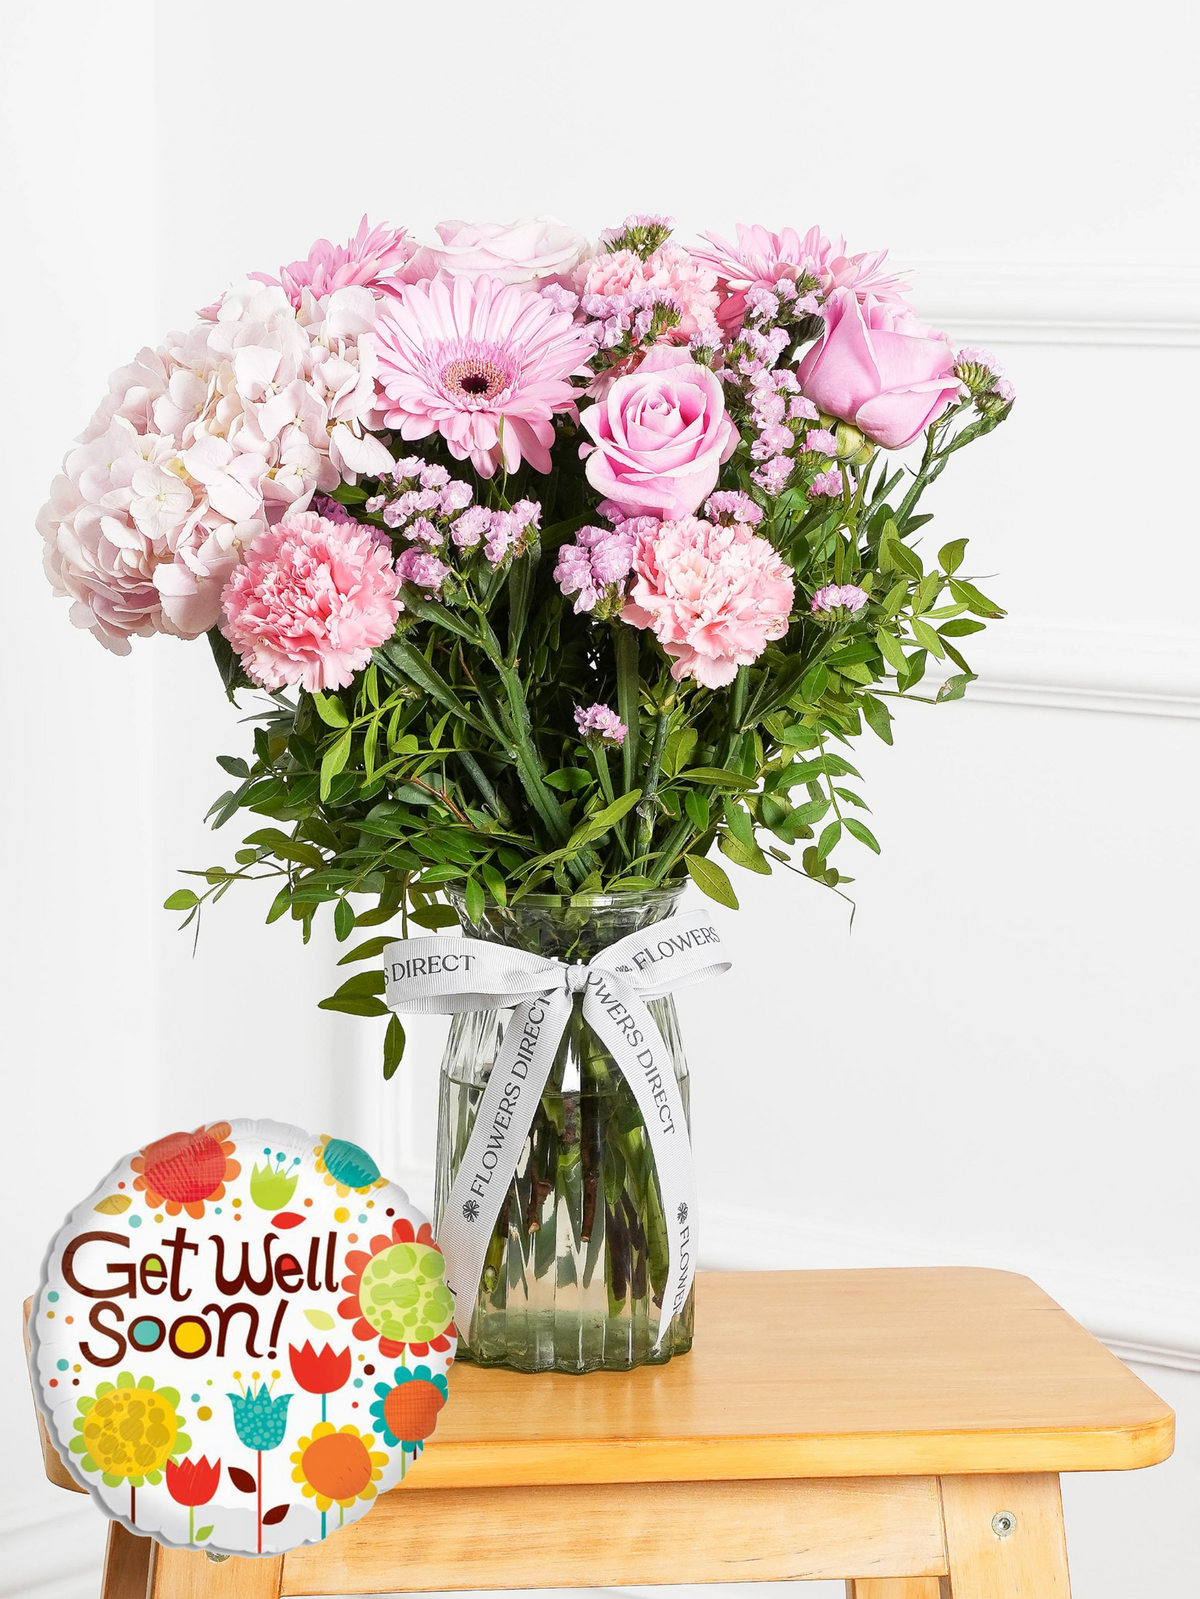 Sweetheart - Vase with Free Get Well Balloon